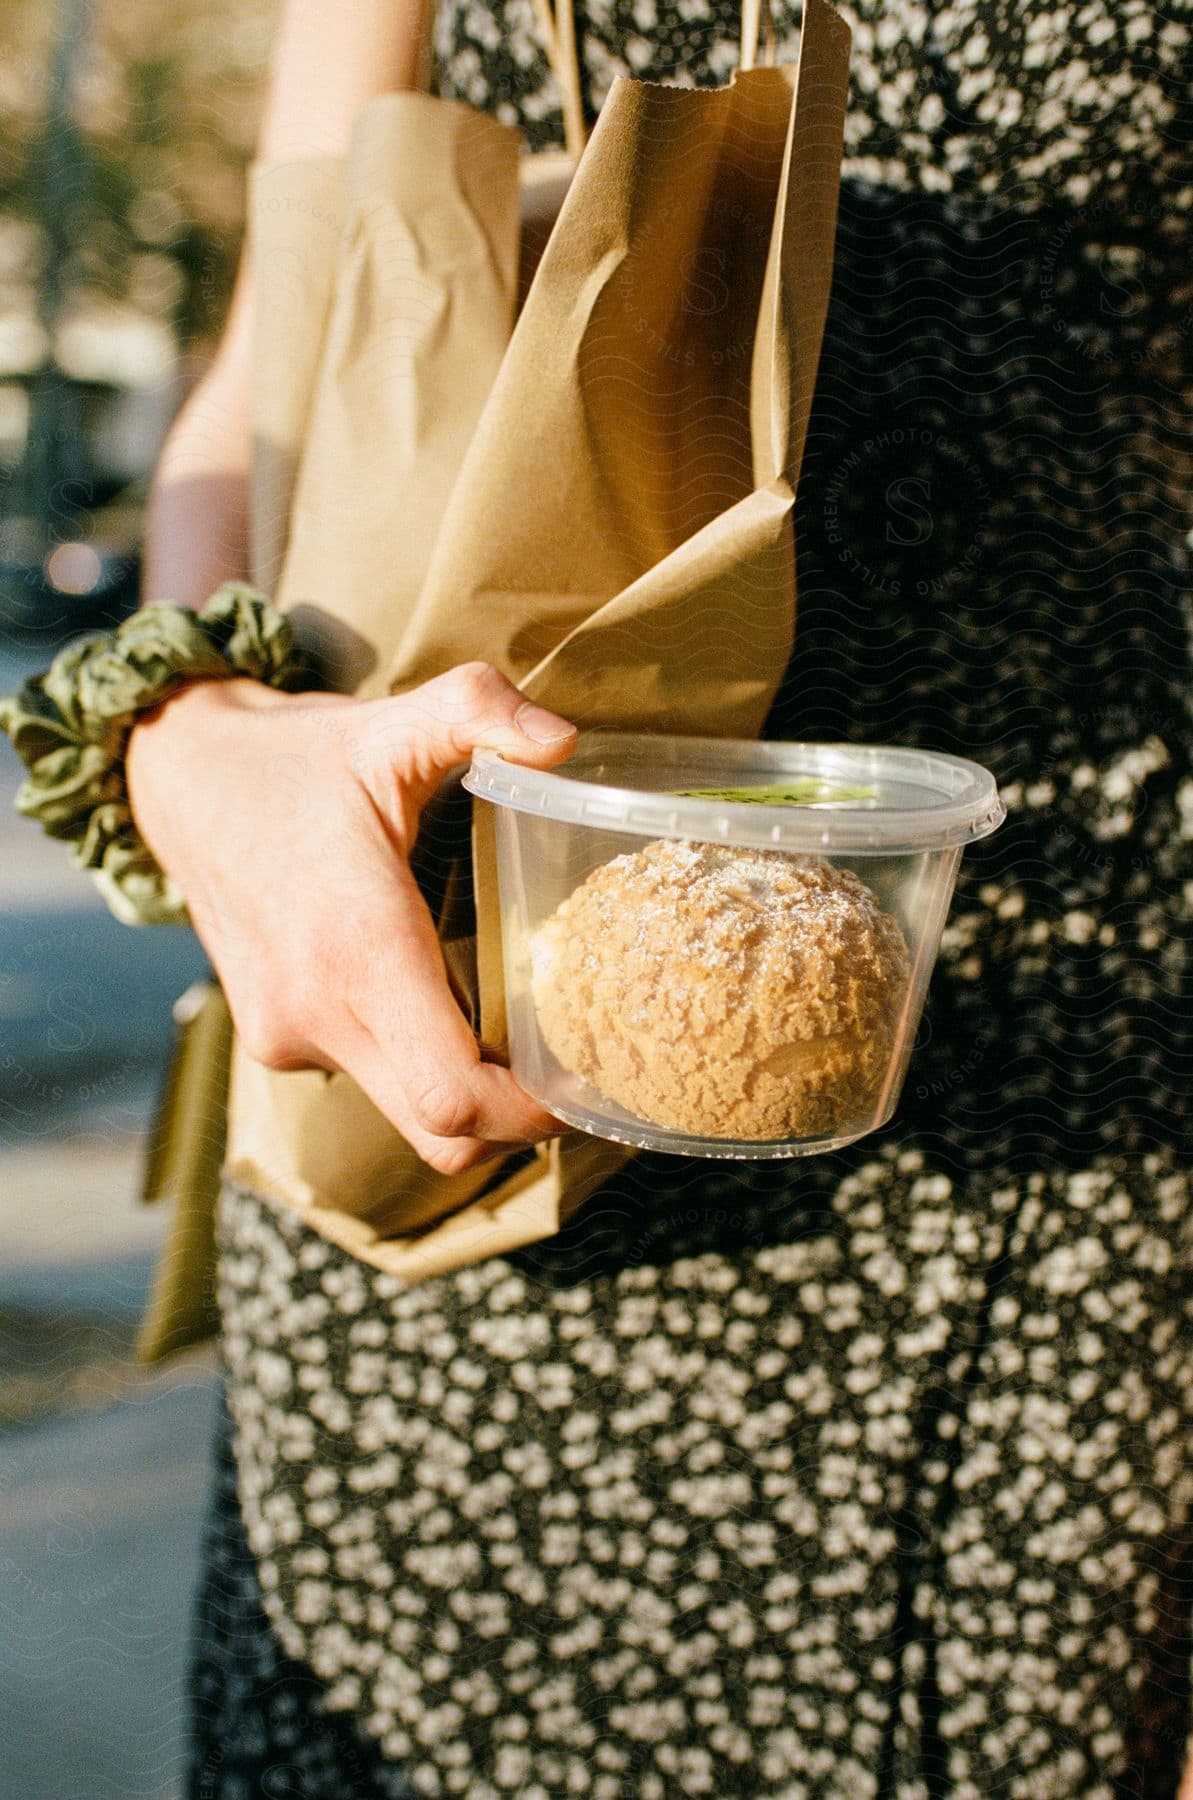 A woman holds a plastic container with a biscuit inside with a paper bag under her arm